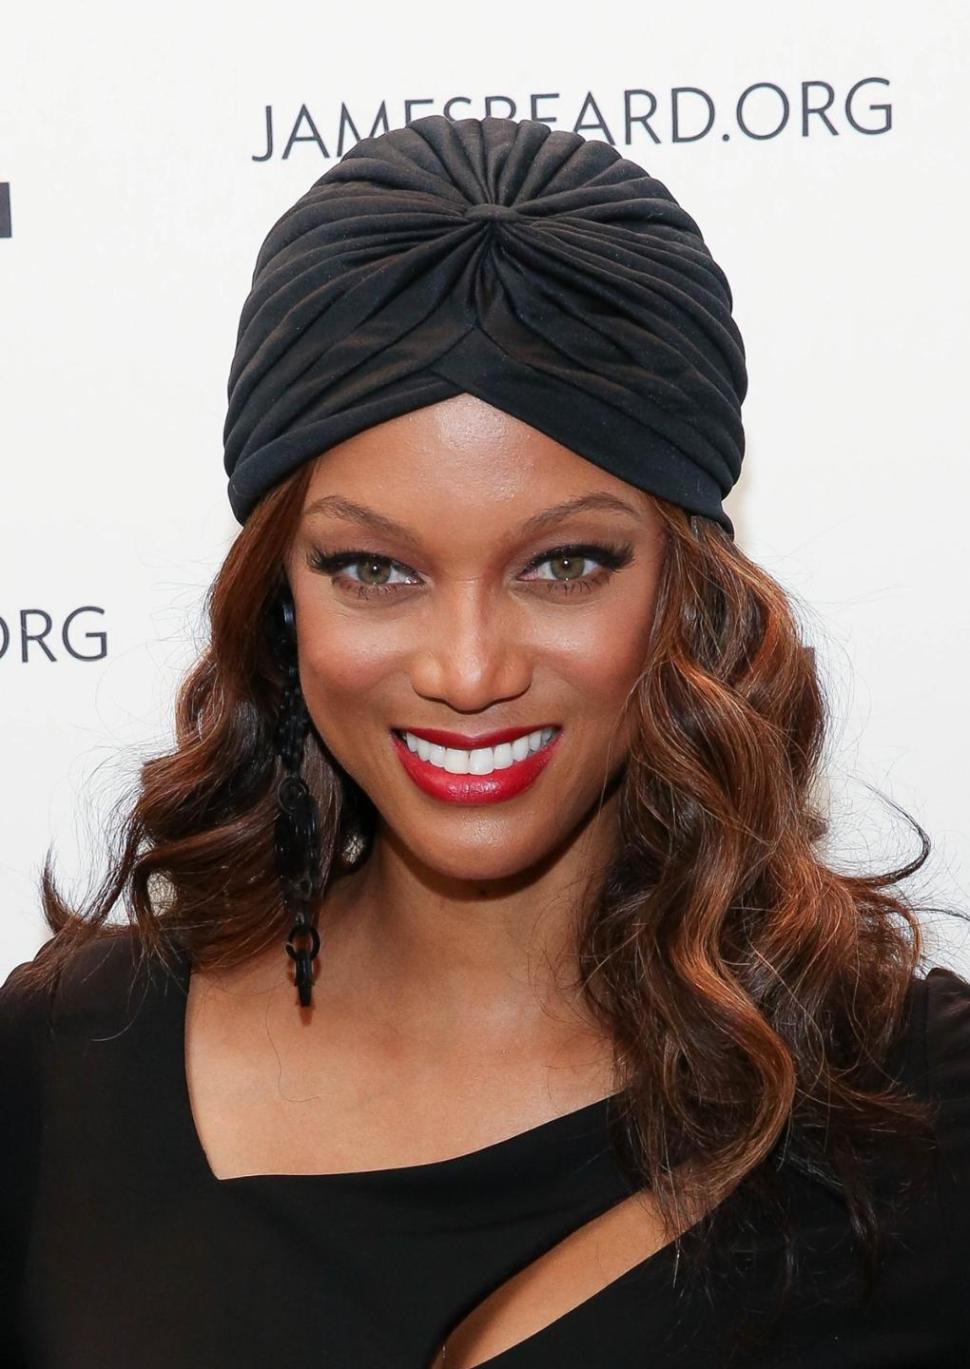 Tyra Banks was unable to spend much time at her Nolita pad, due to her work schedule.